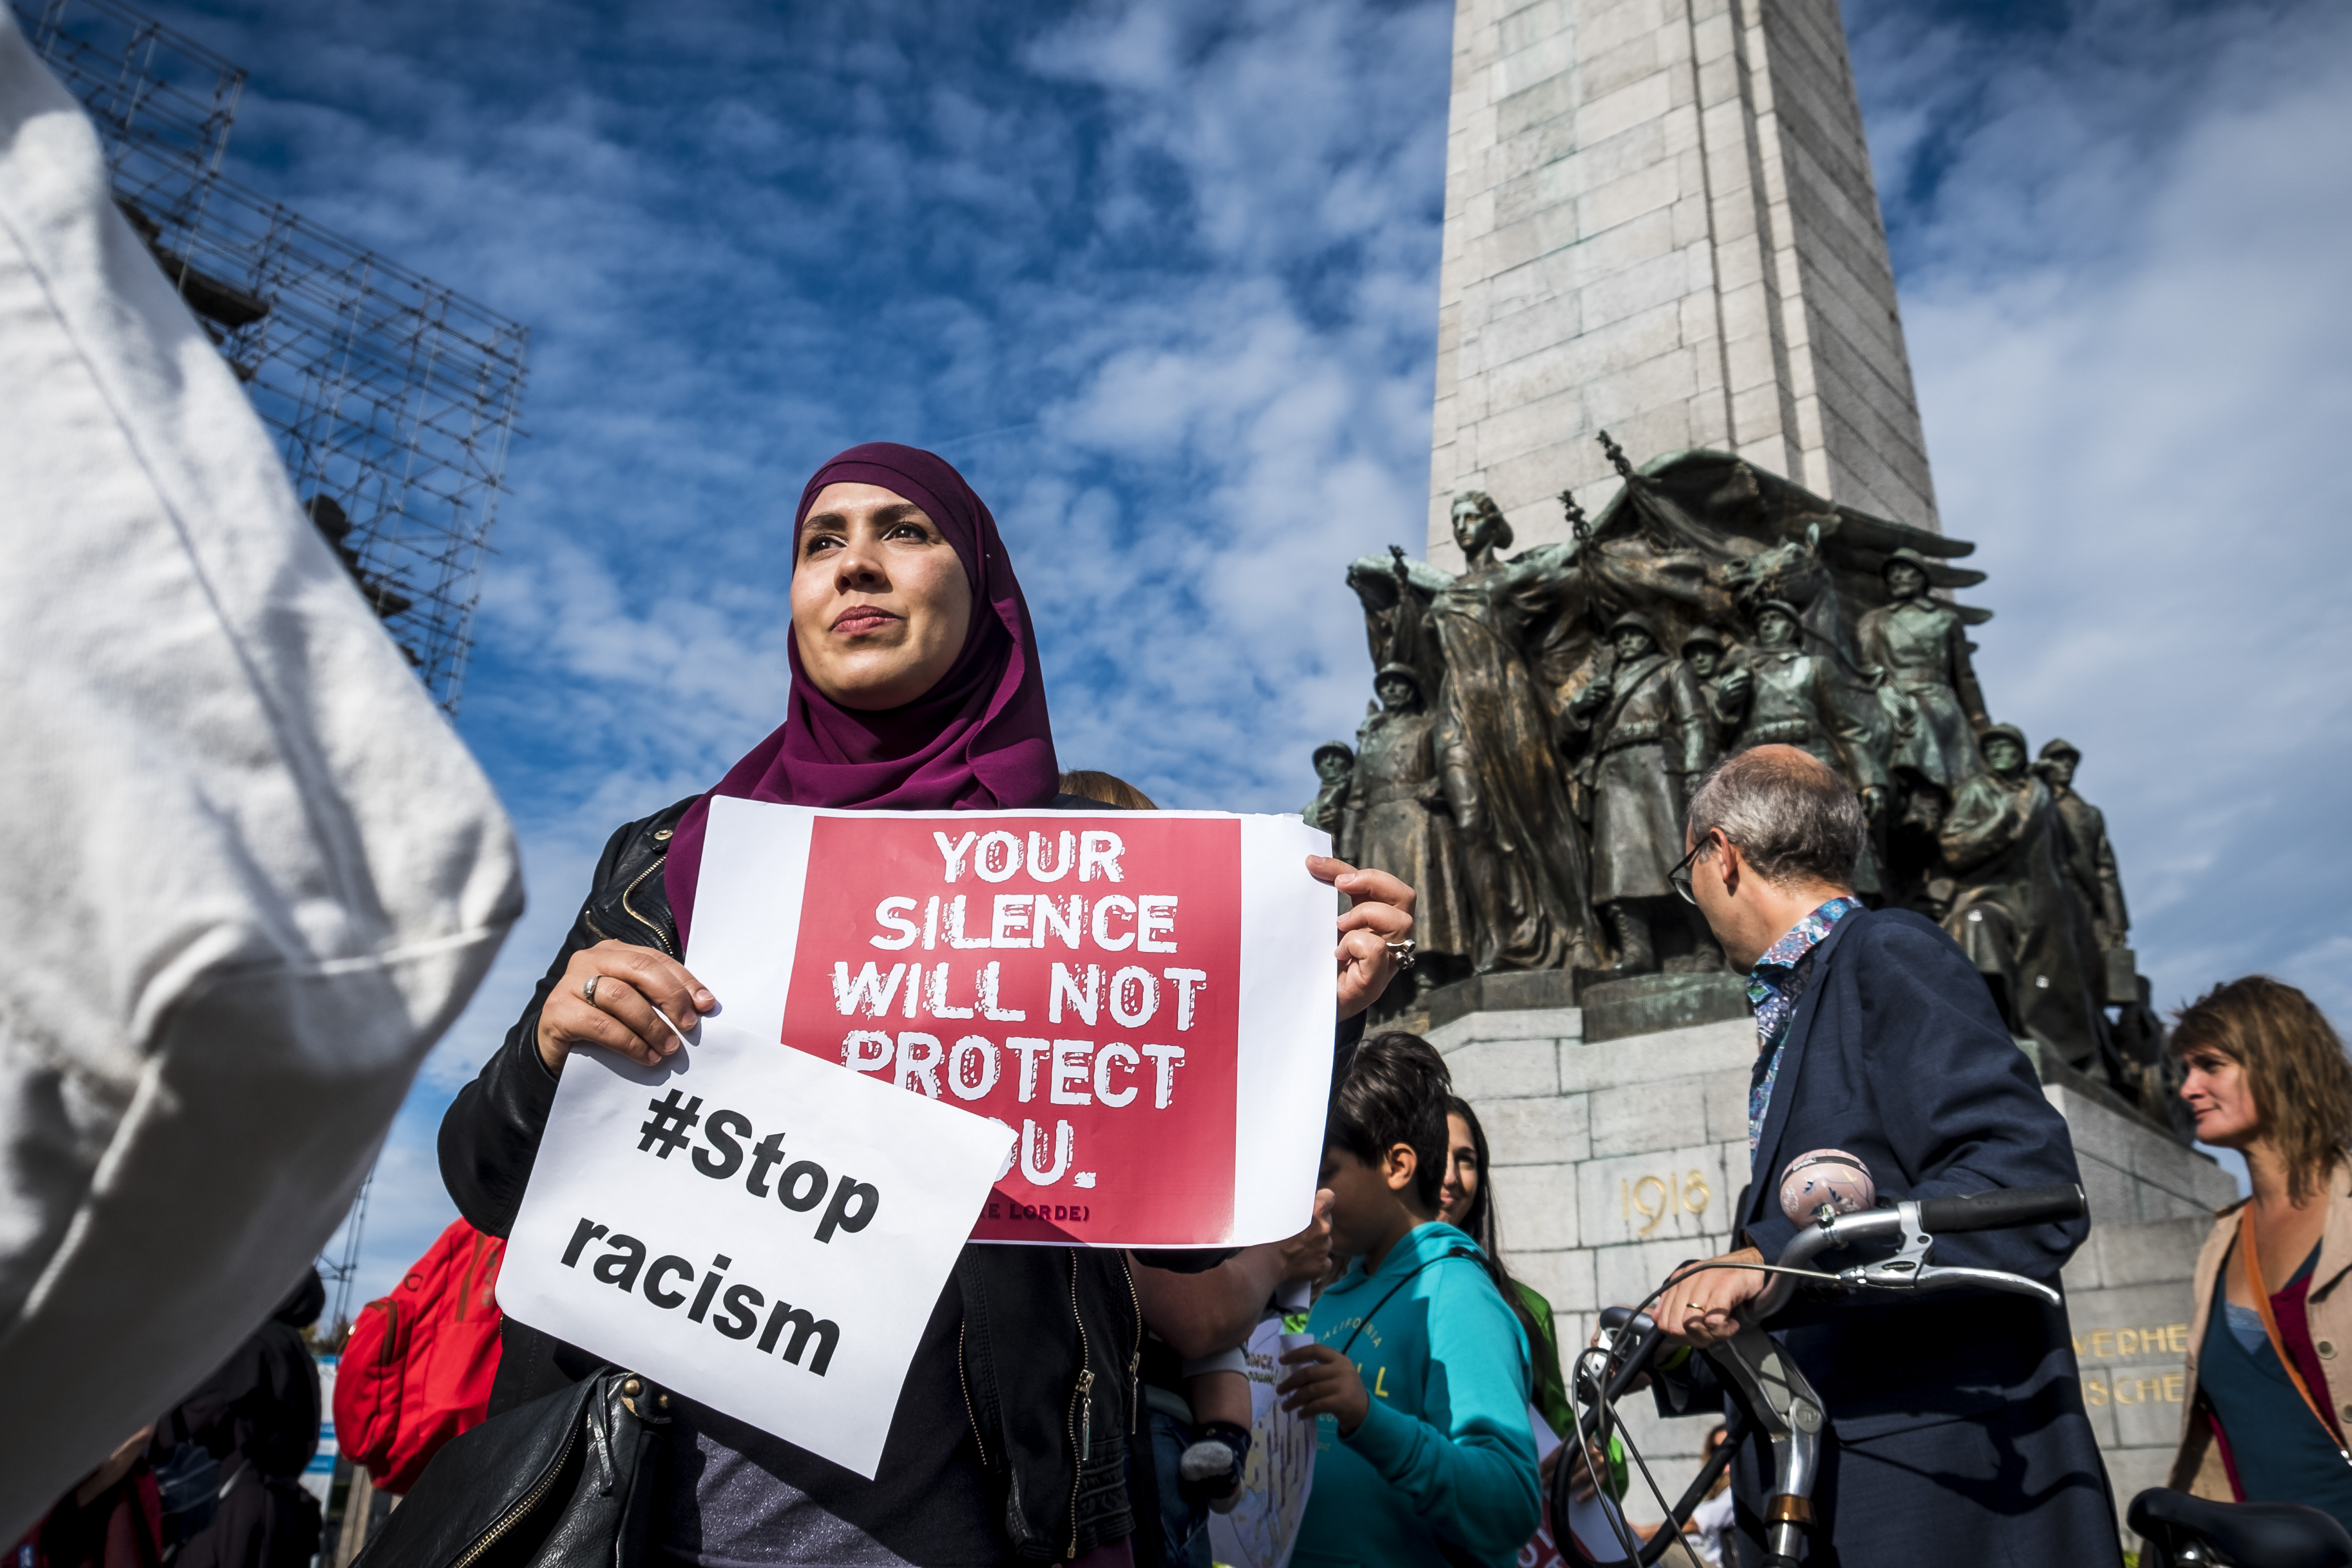 People hold posters as they protest against 'hate and islamophobia' in Brussels on September 9, 2018 (AFP)